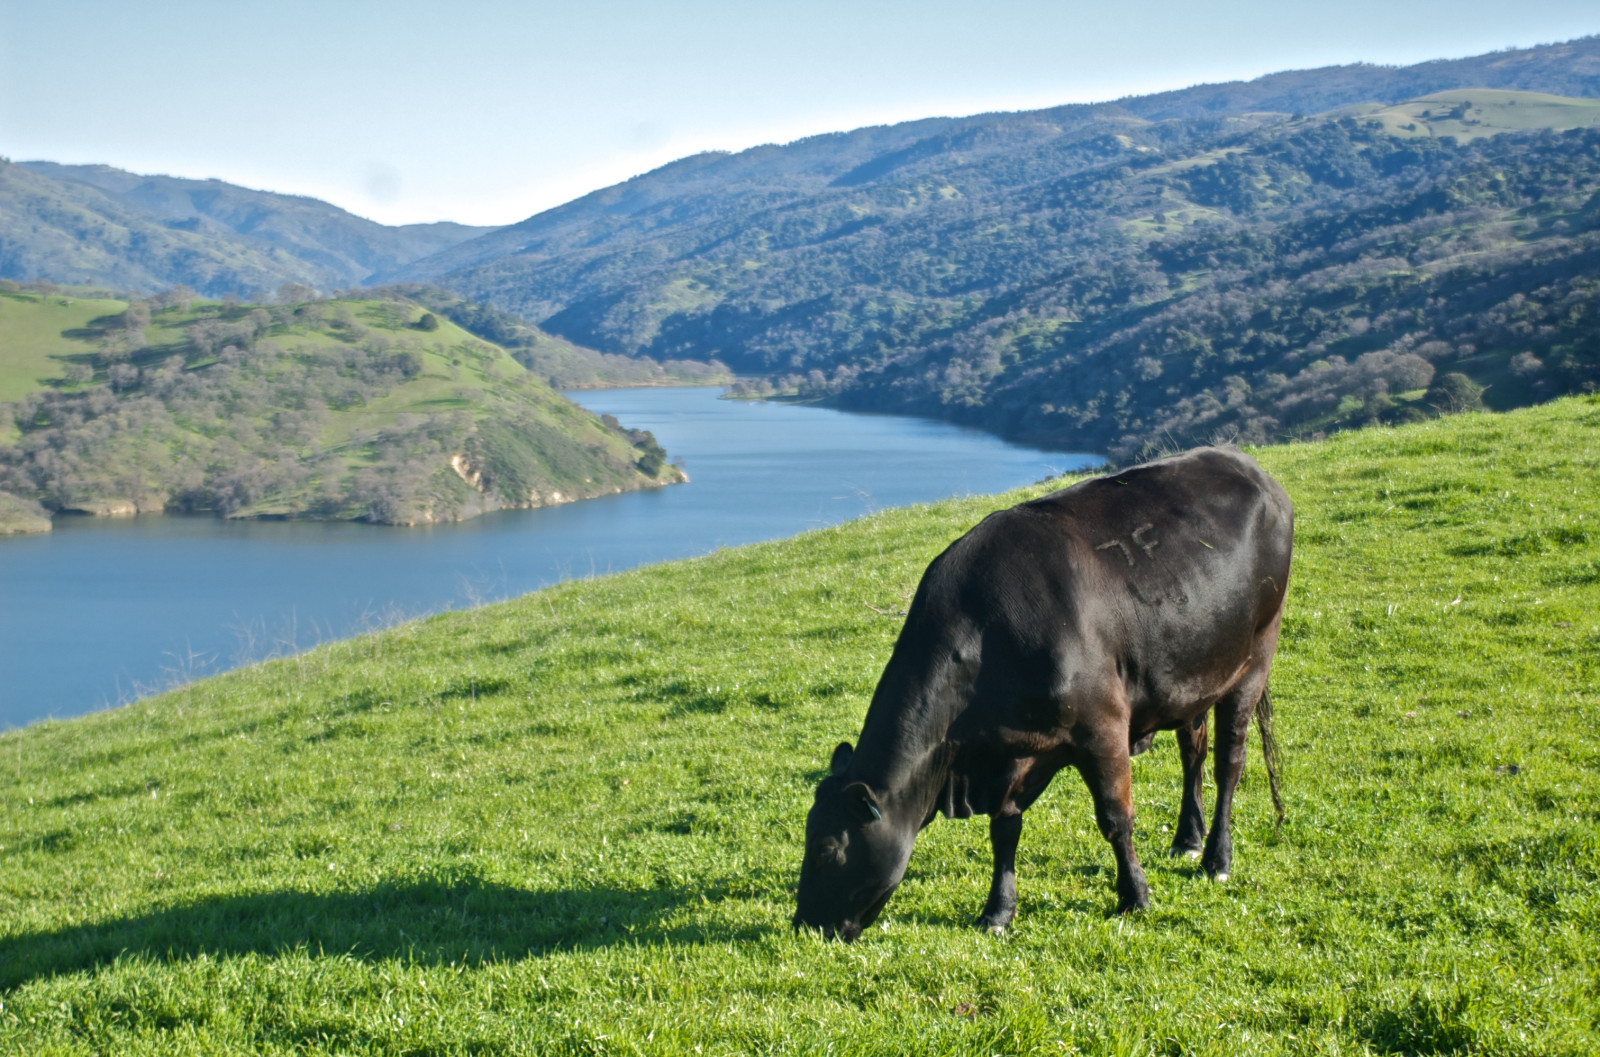 Lake Del Valle, Livermore. Grazing can support watershed function.   Photo credit: Kirschenmann